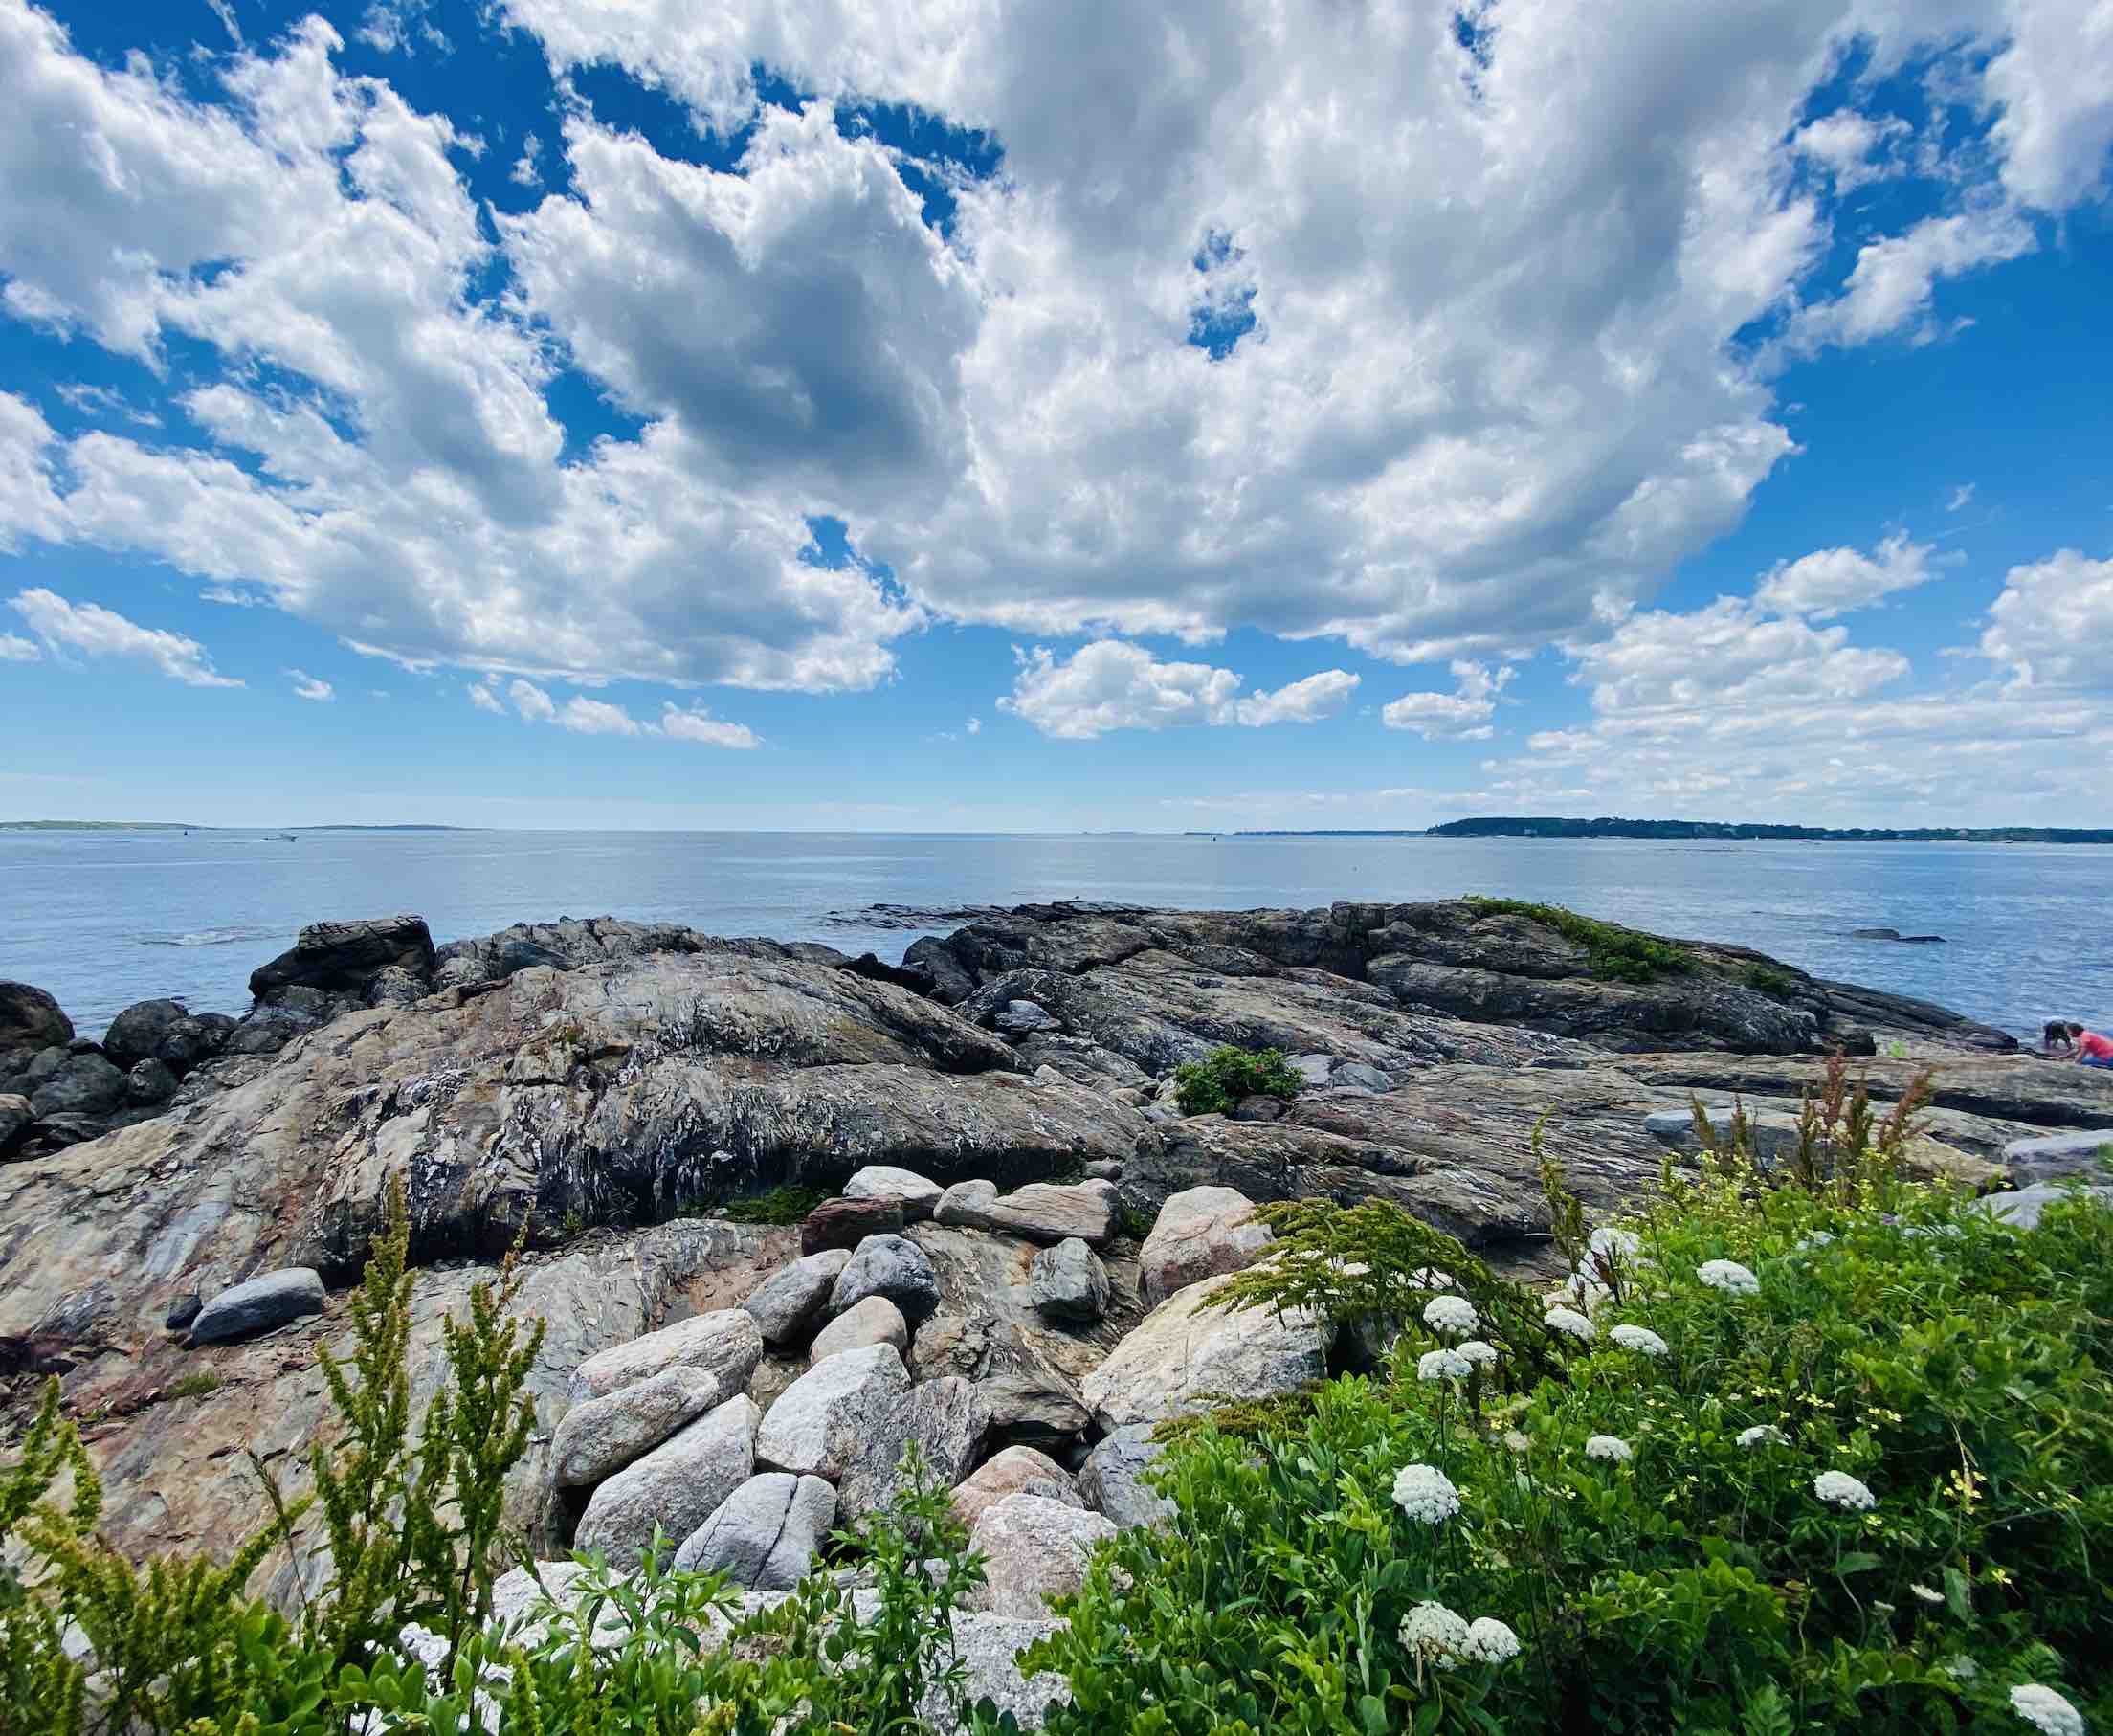 10 Coastal Towns in Maine Worth Visiting - Let's Be Merry